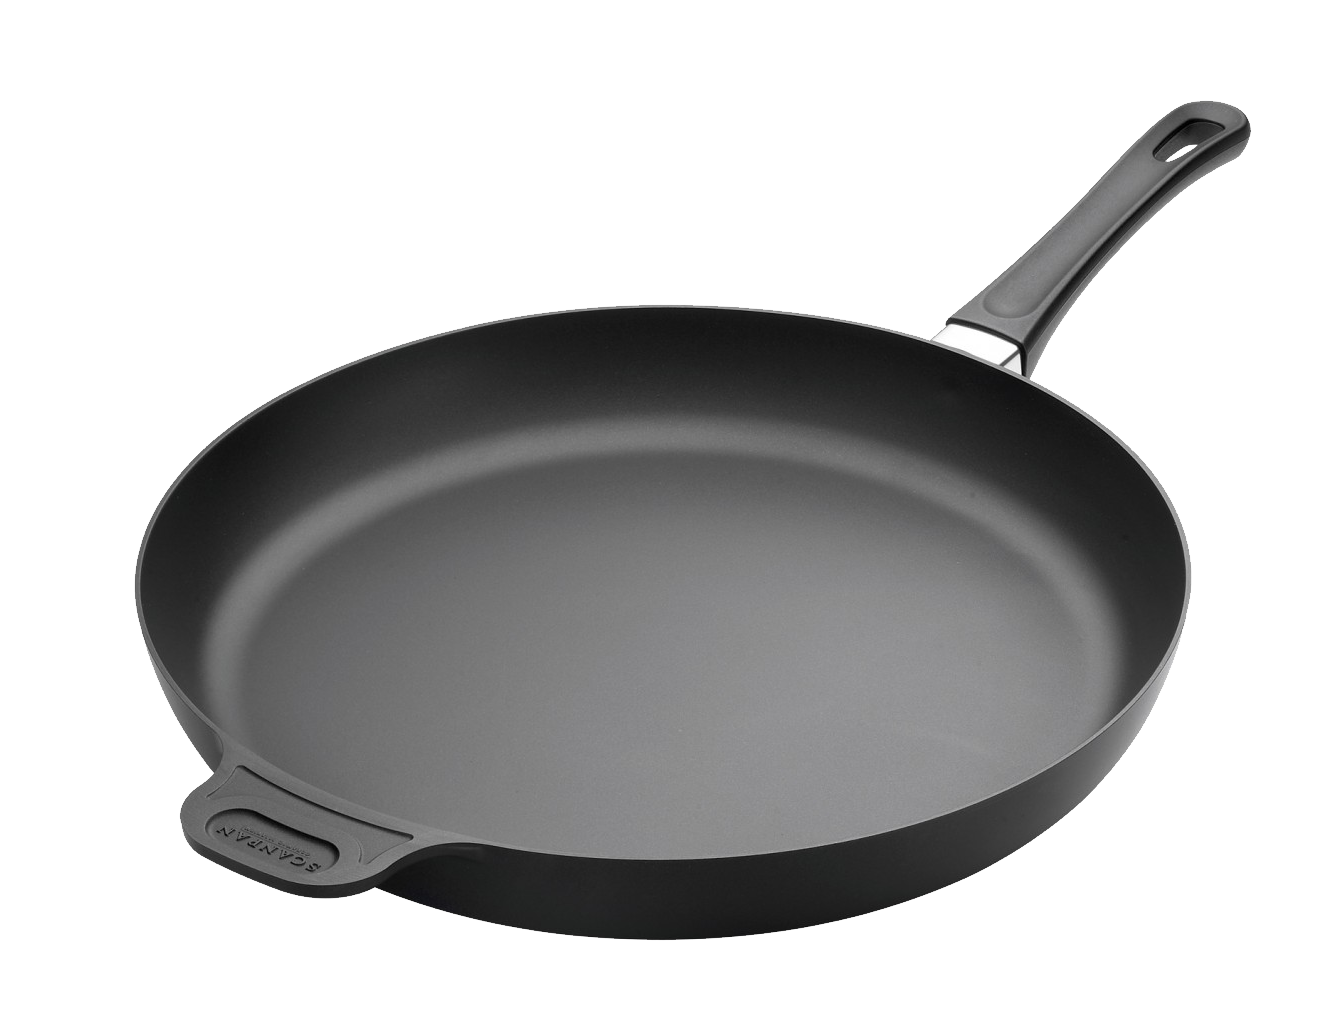 Frying Pan PNG Image in High Definition - Frying Pan Png